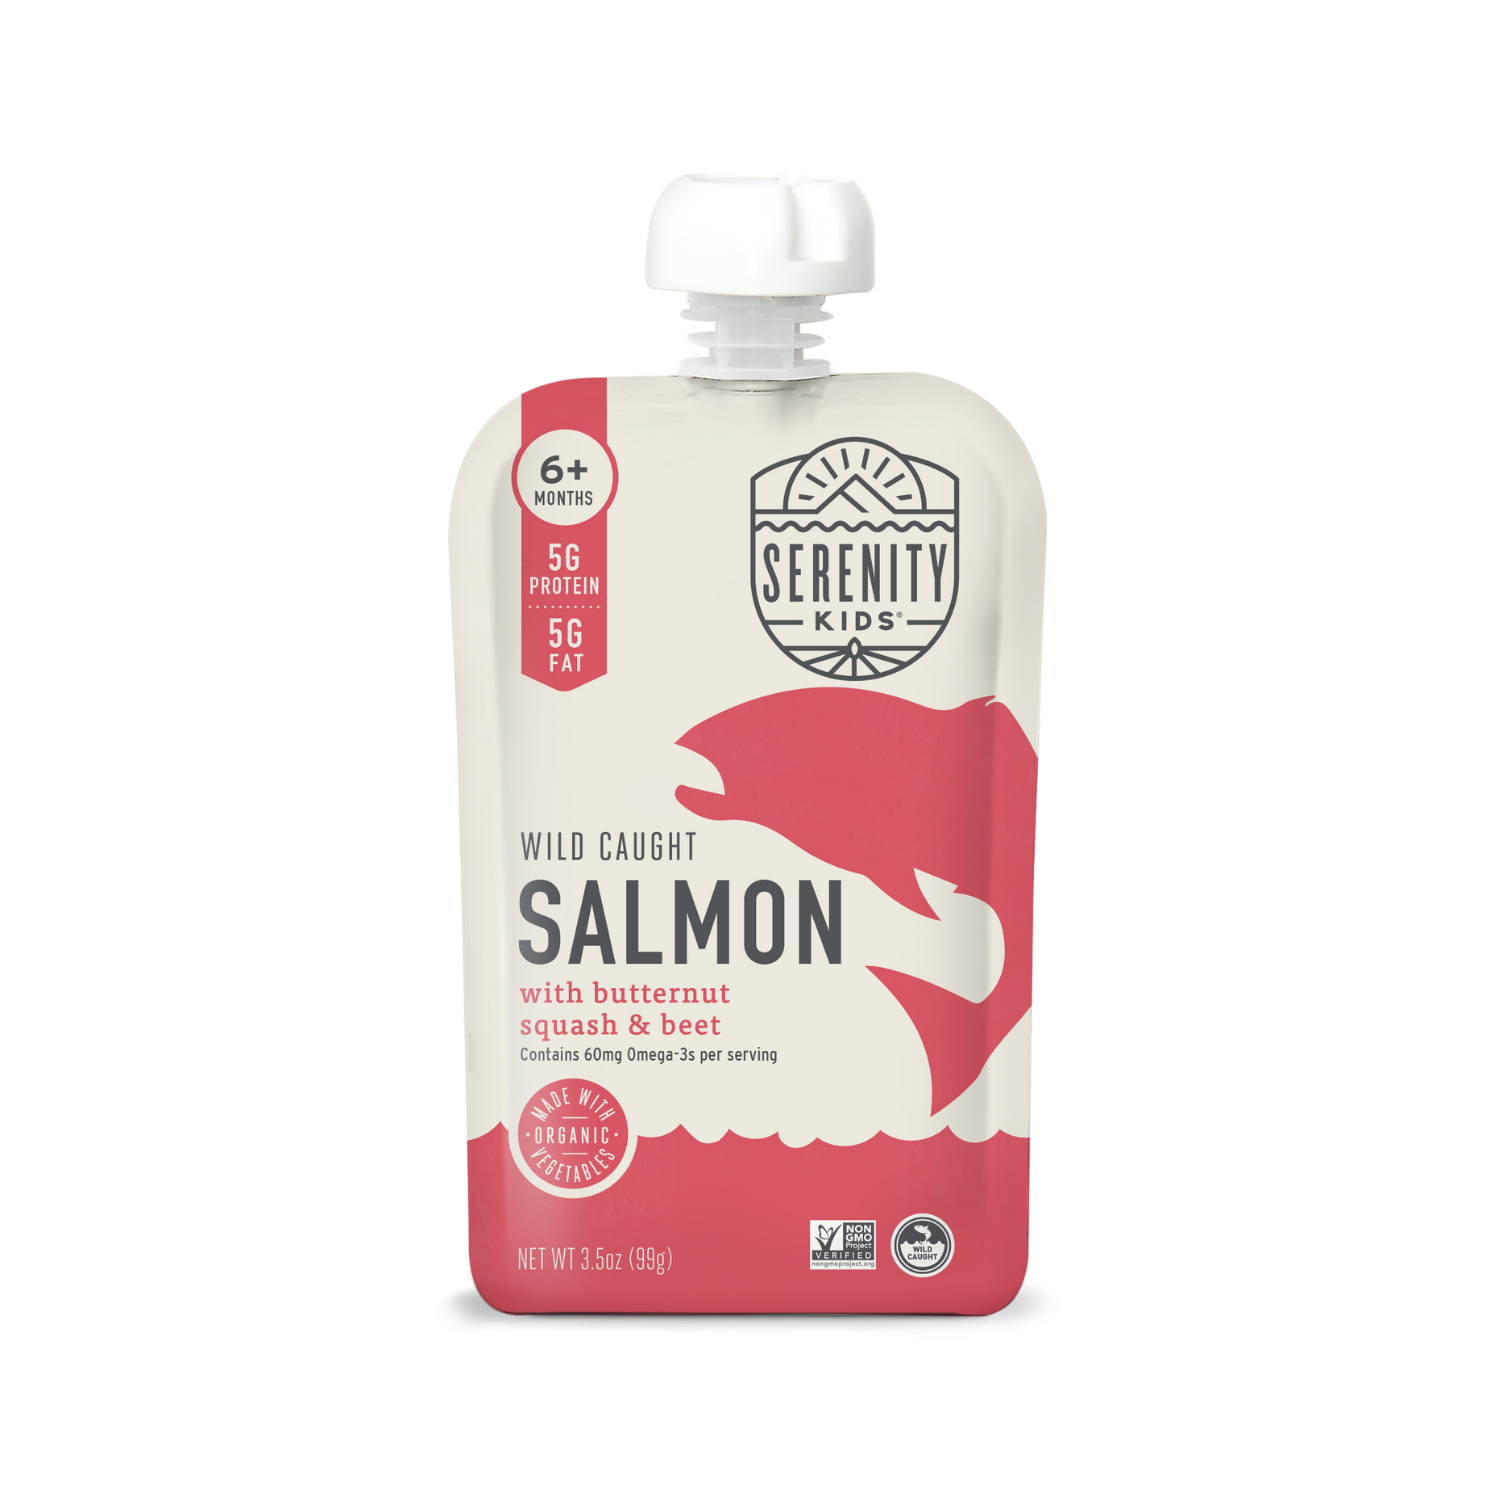 Wild Caught Salmon Baby Food Pouch with Organic Butternut Squash and Beet